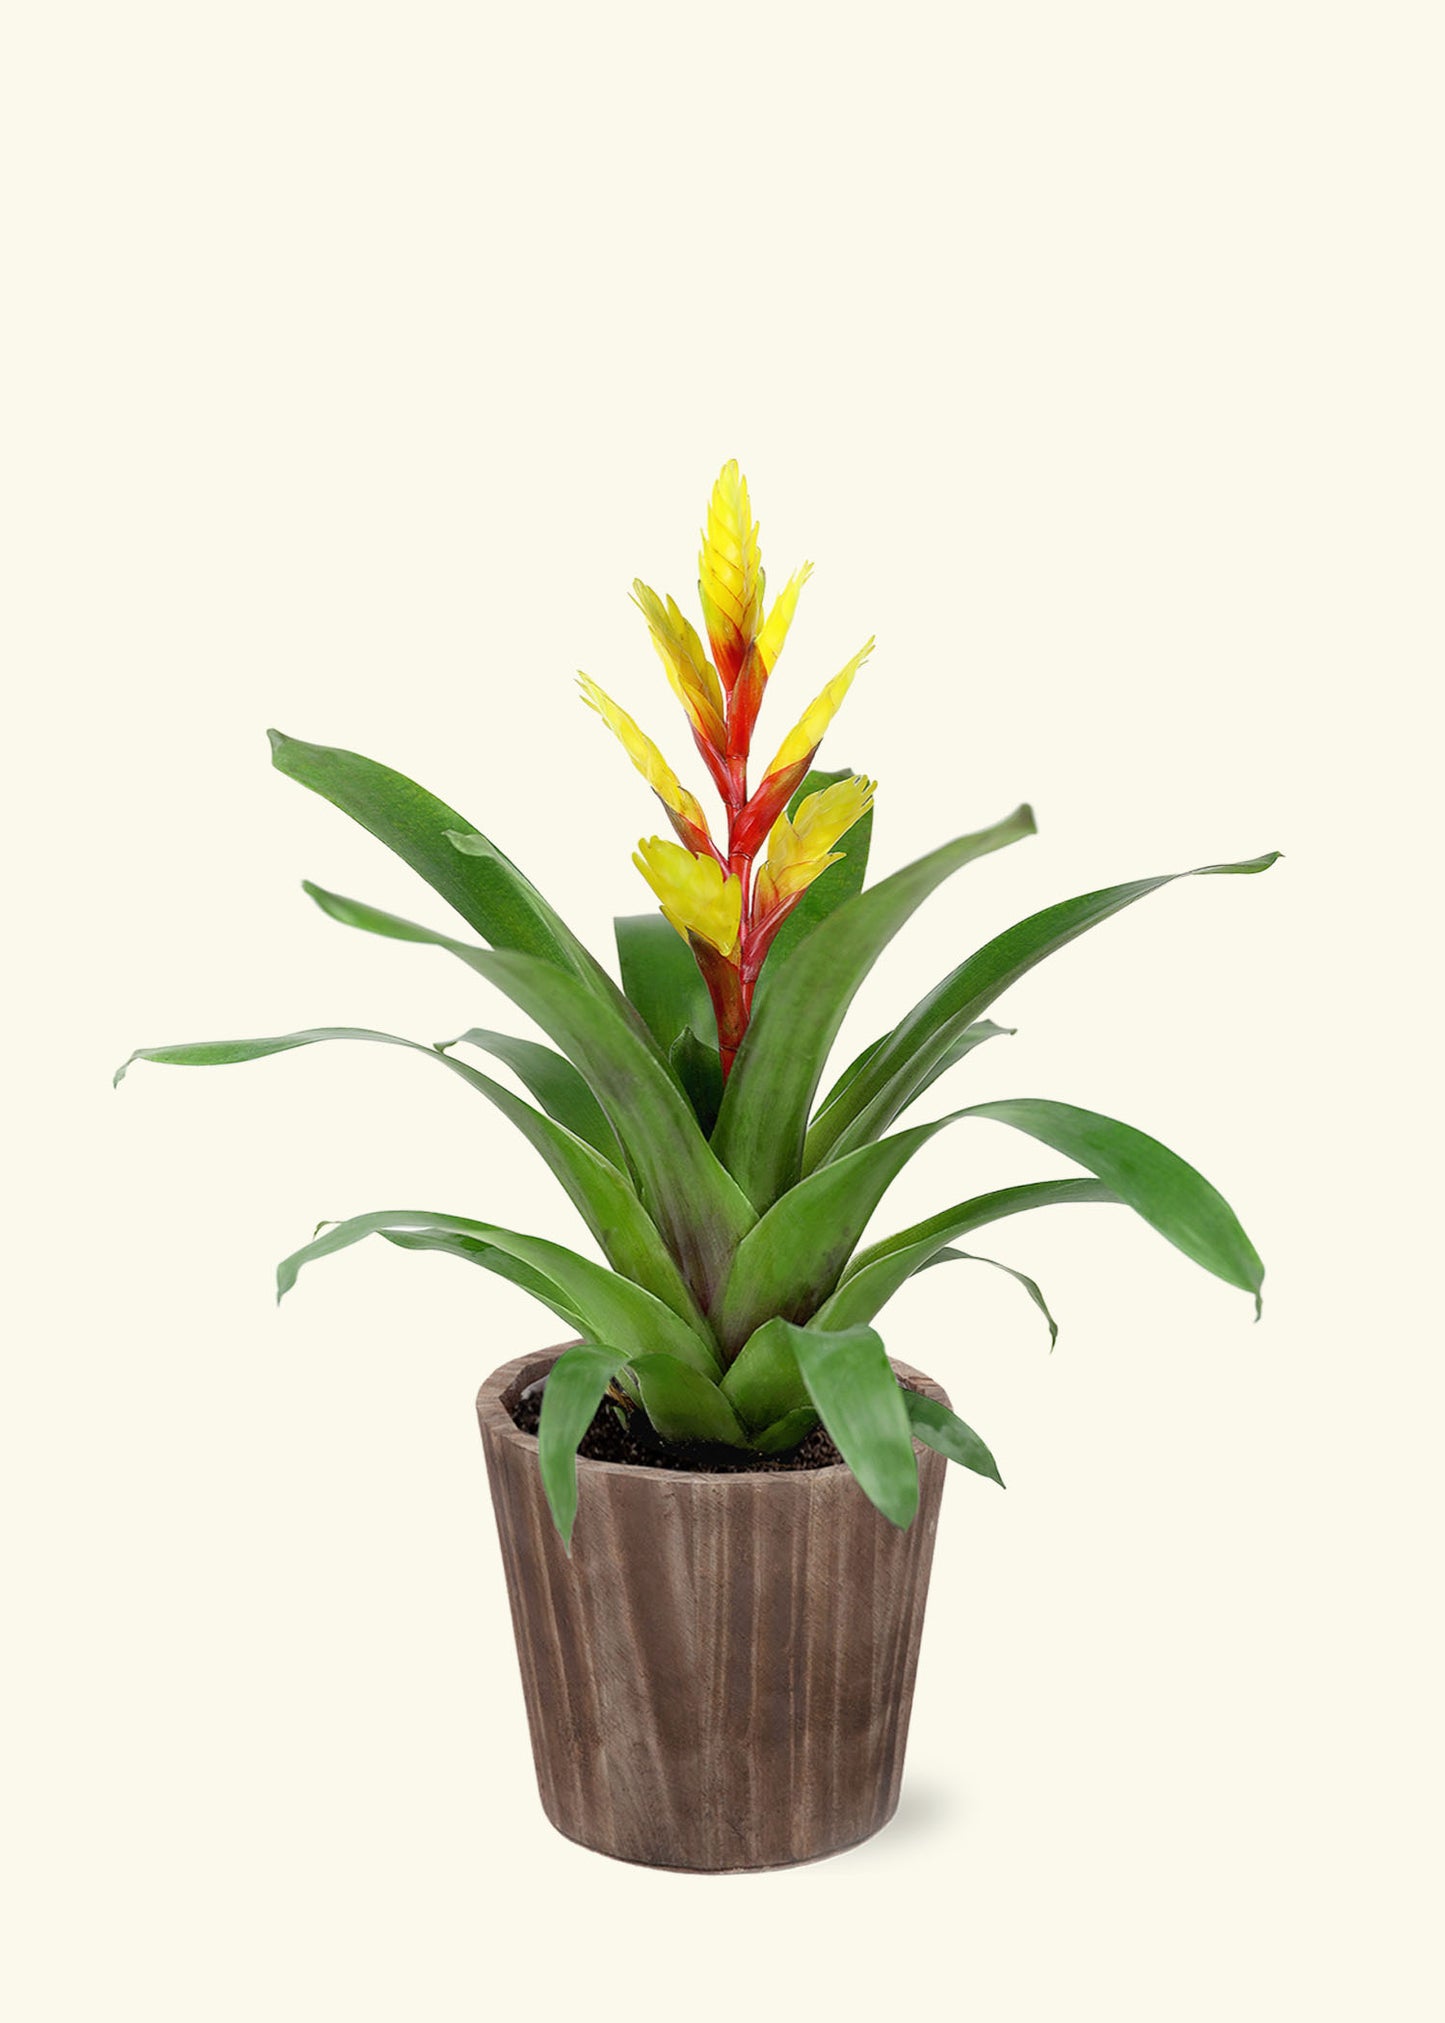 Small Yellow Bromeliad in a brown wilson wood grow pot.